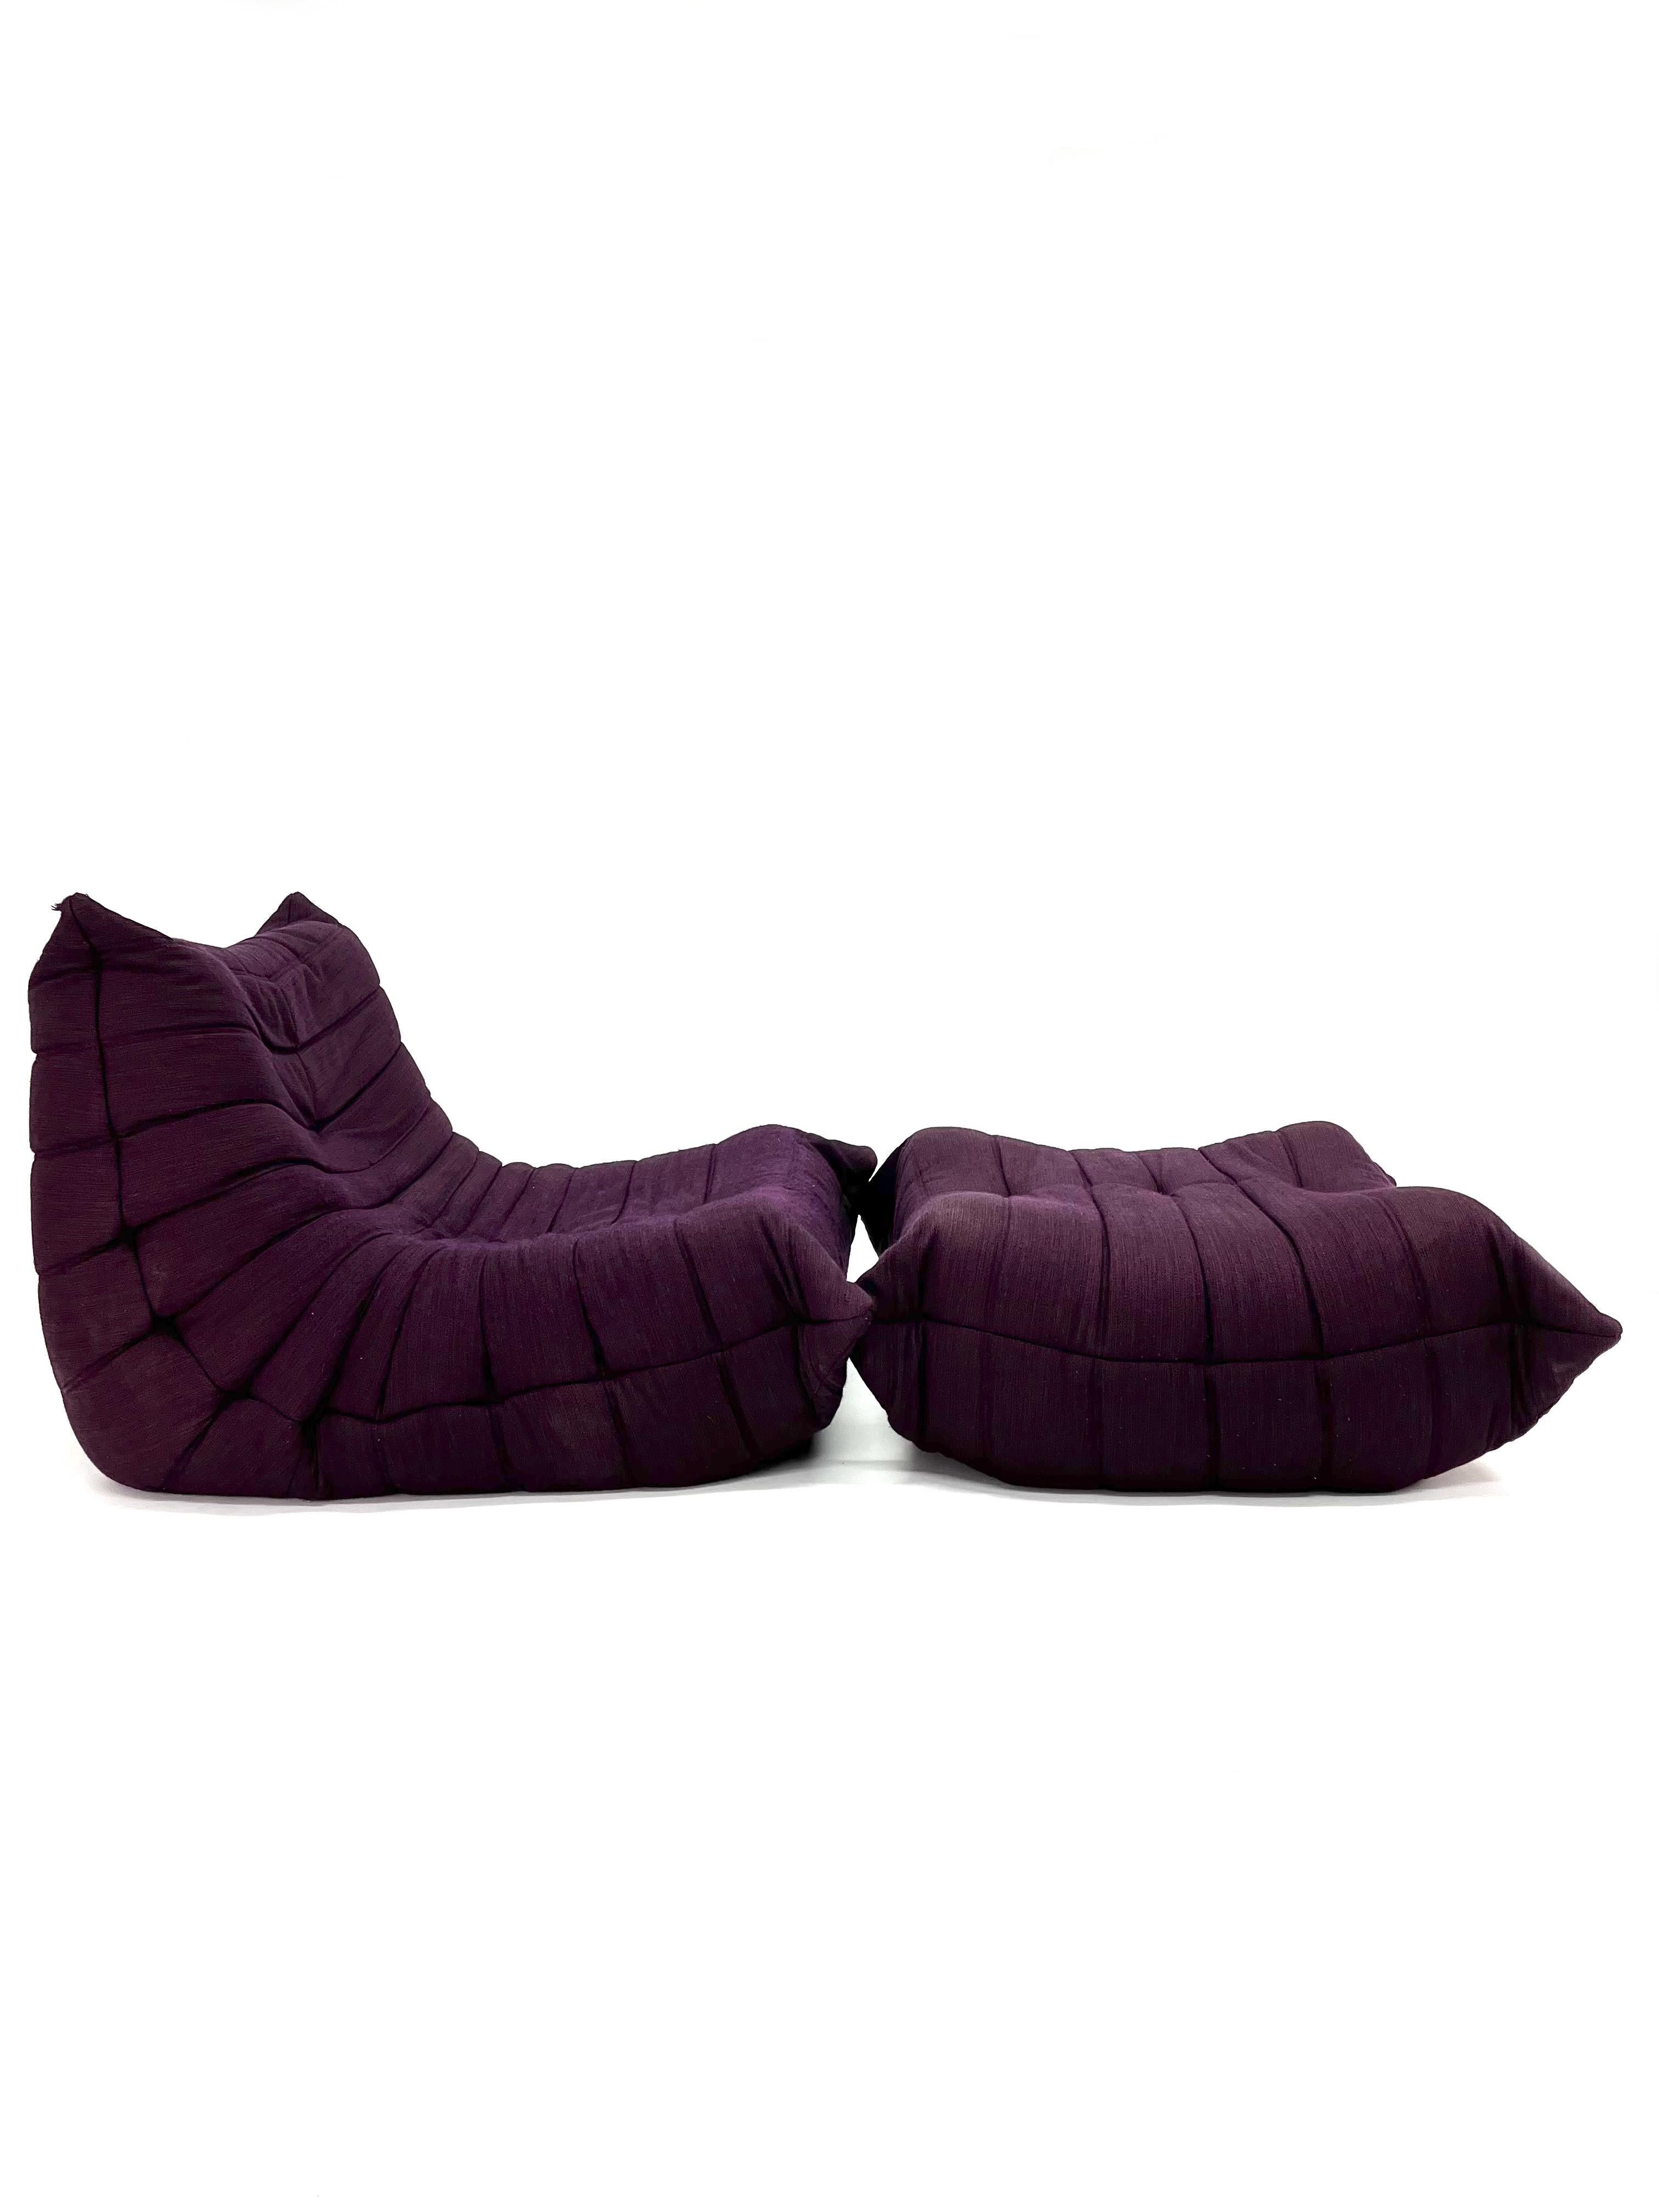 Late 20th Century Togo Chair and Ottoman in Purple by Michel Ducaroy for Ligne Roset For Sale